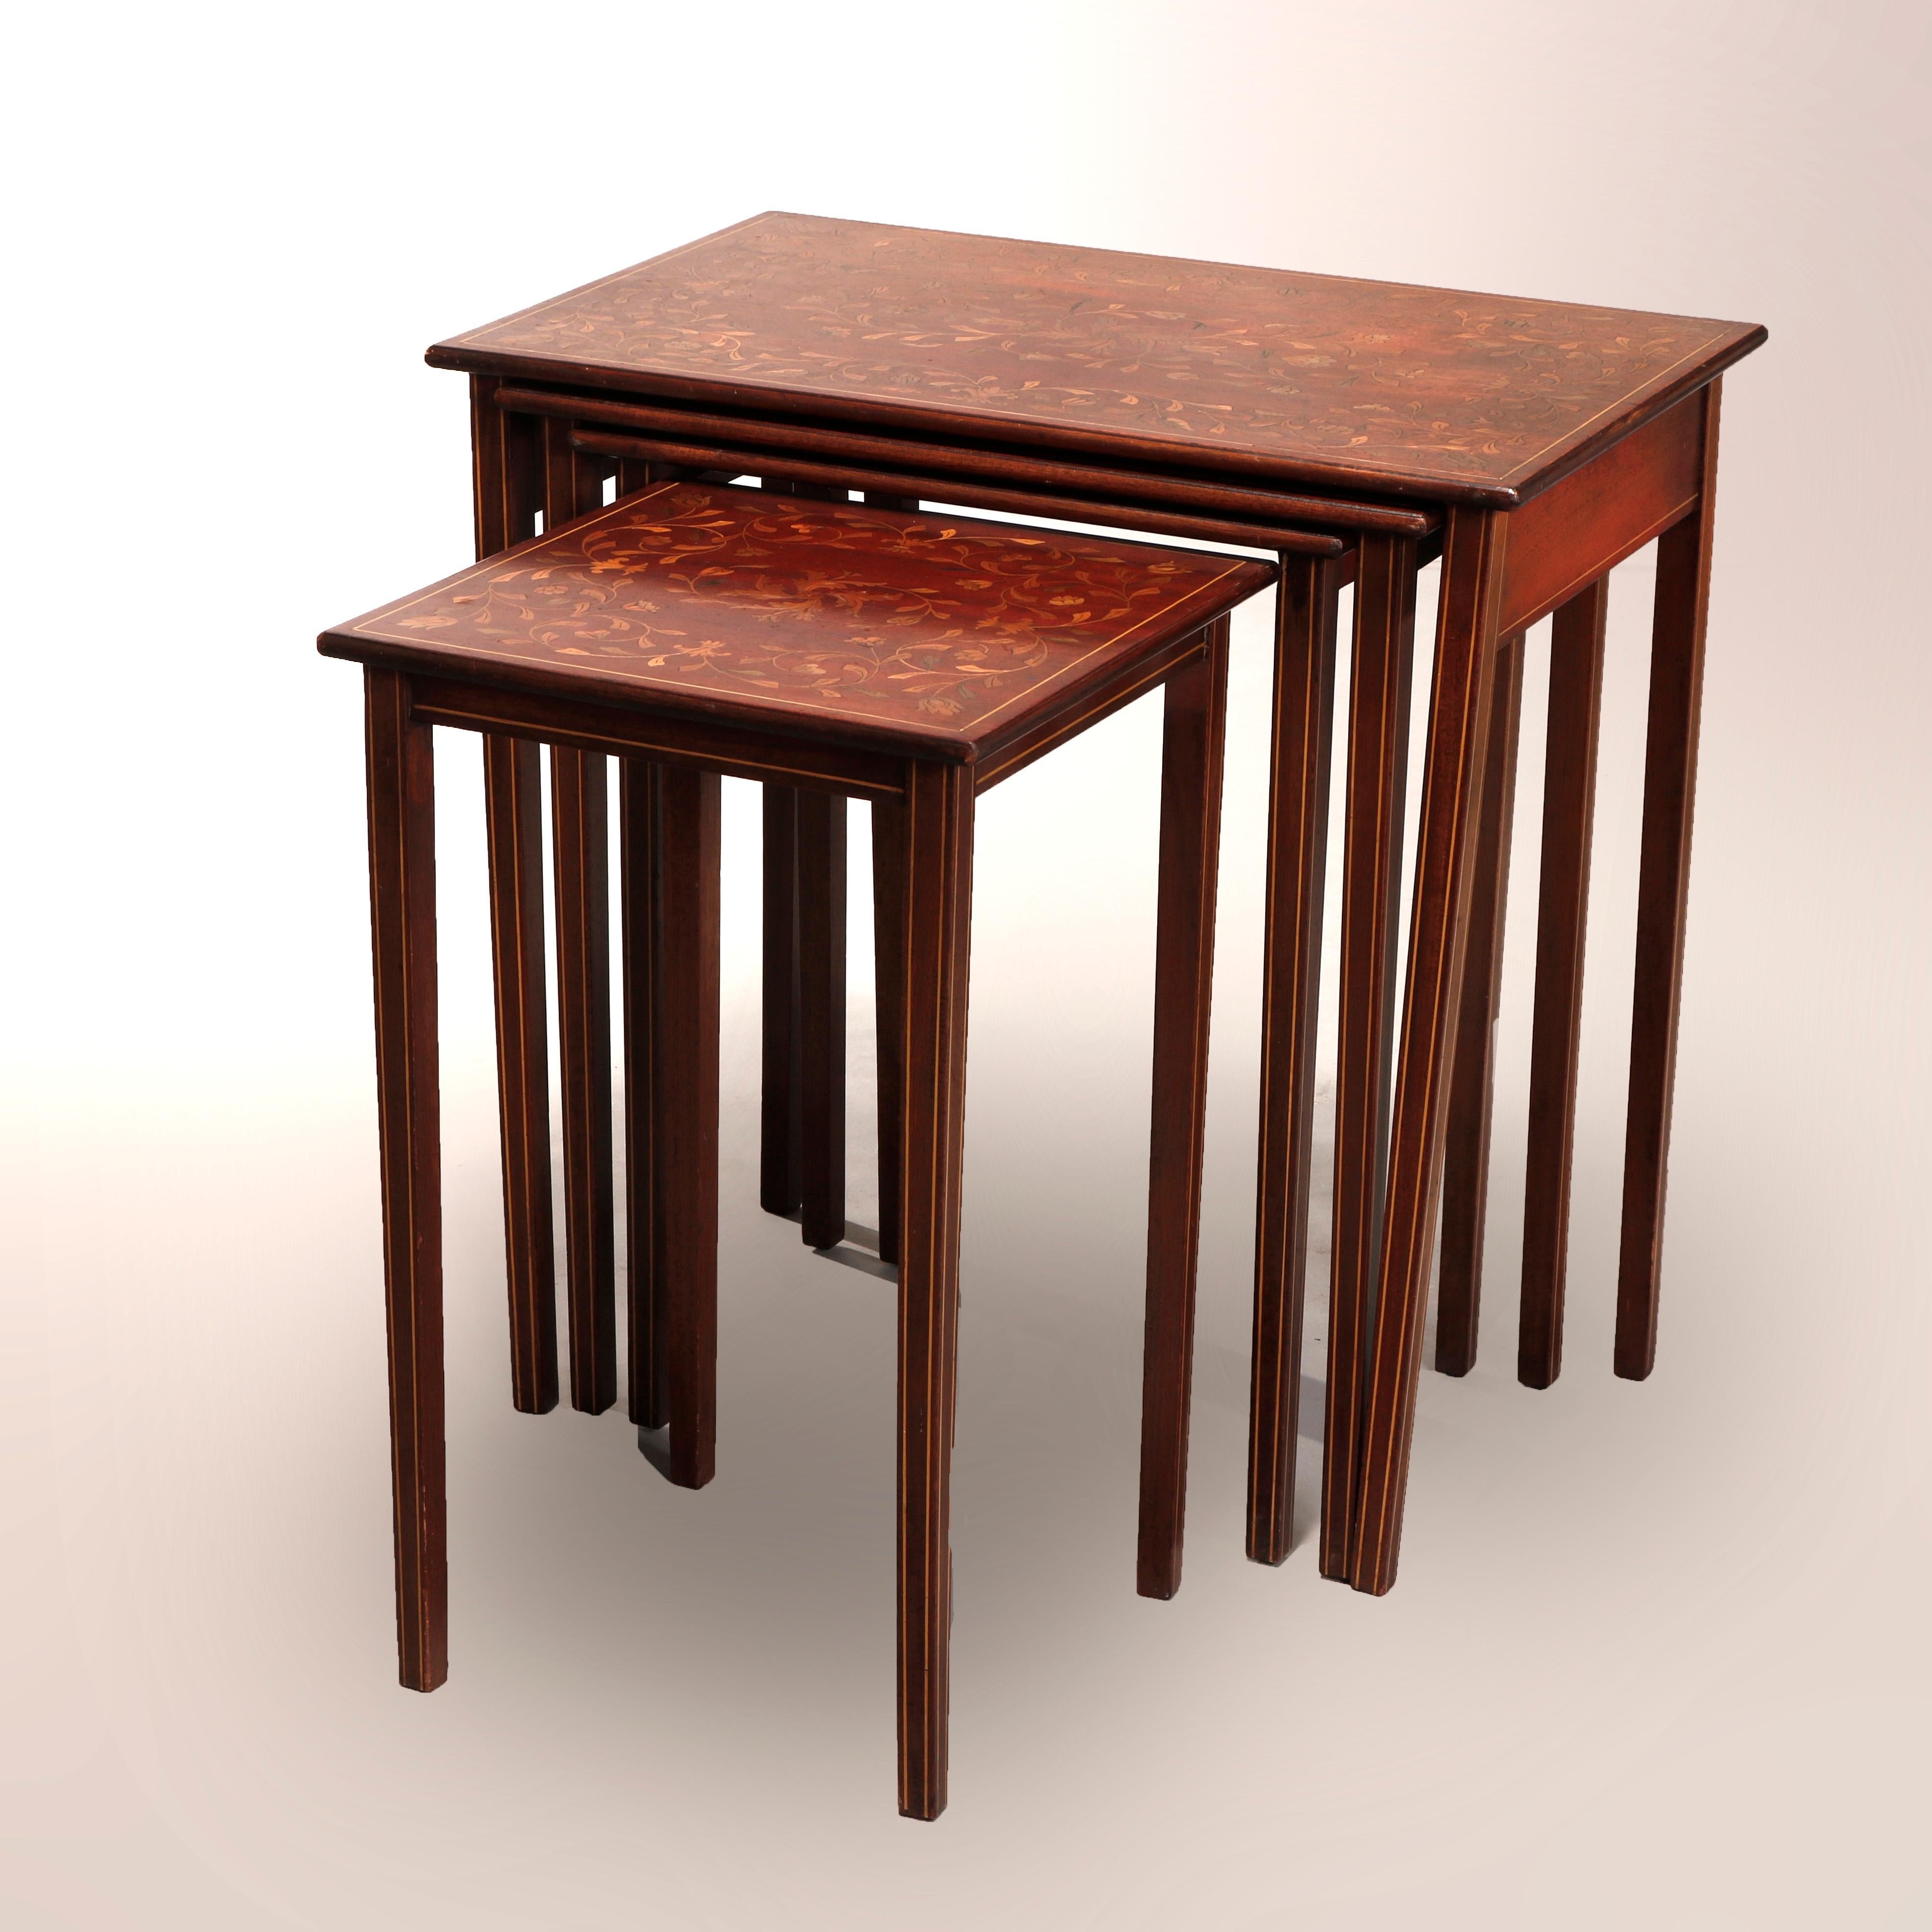 Carved Antique R.J. Horner Mahogany Marquetry Satinwood Inlay Nesting Tables circa 1910